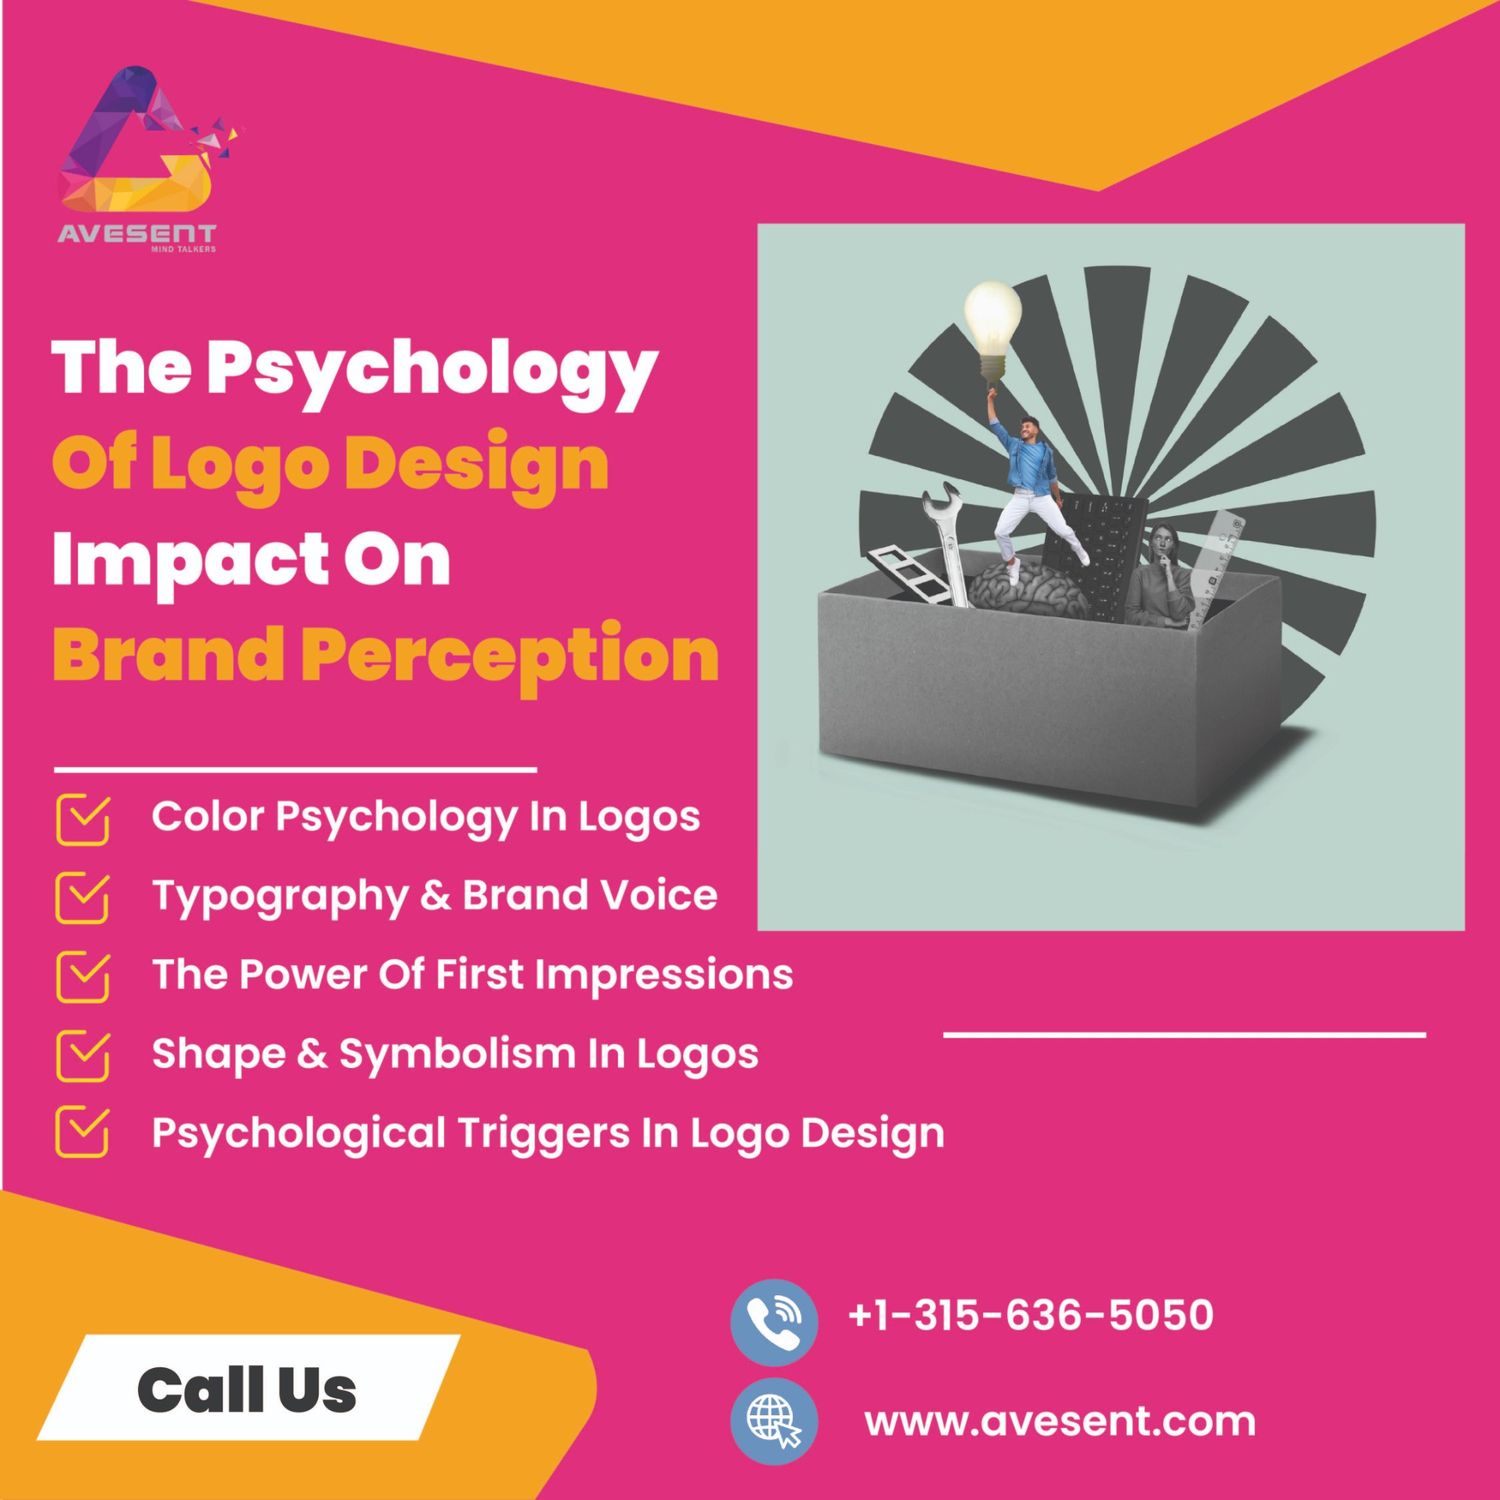 You are currently viewing The Psychology of Logo Design Impact on Brand Perception